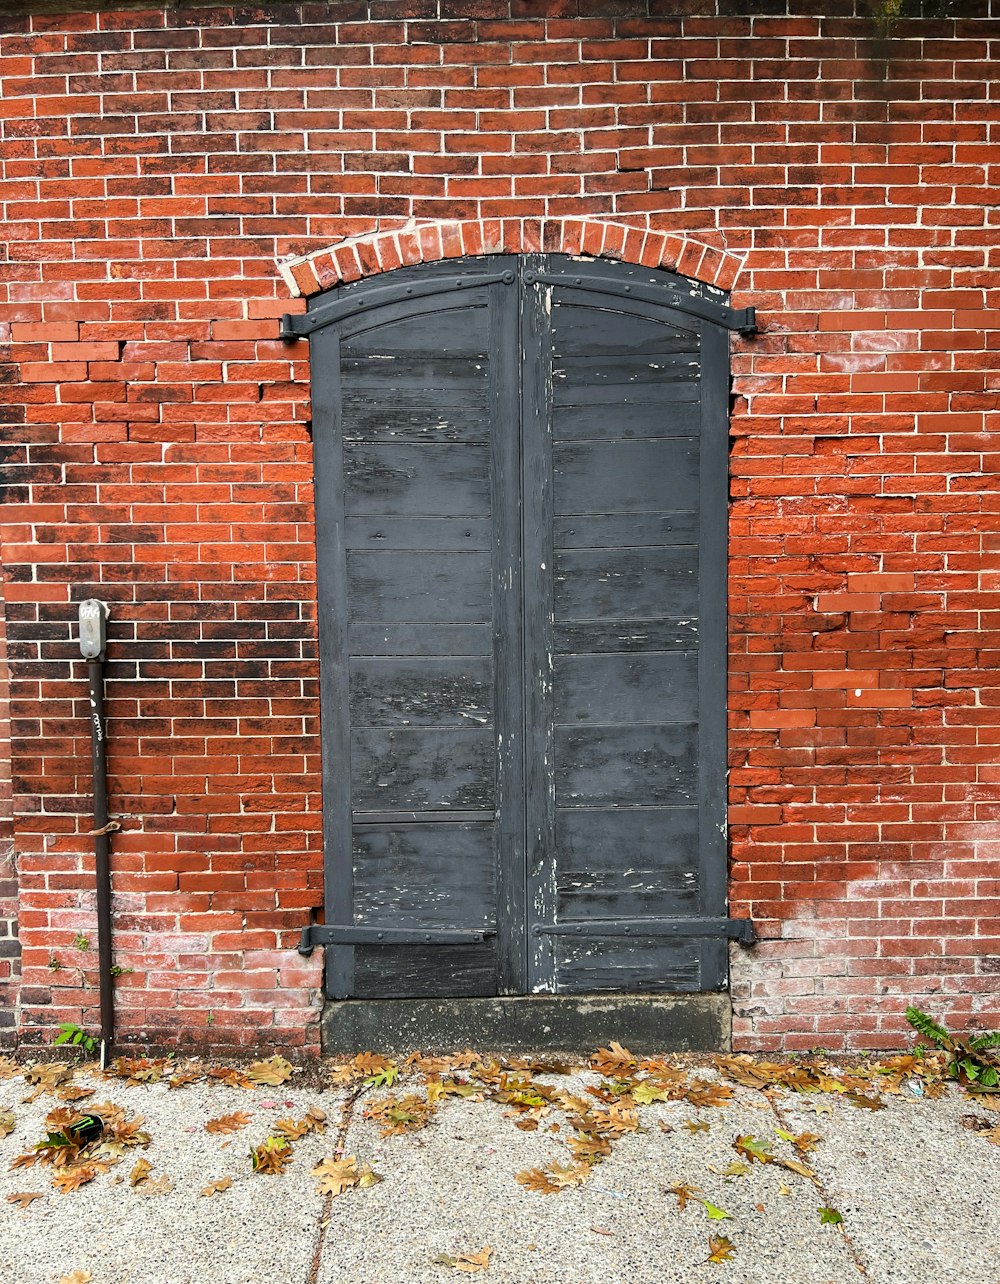 a brick wall with a black door and a parking meter